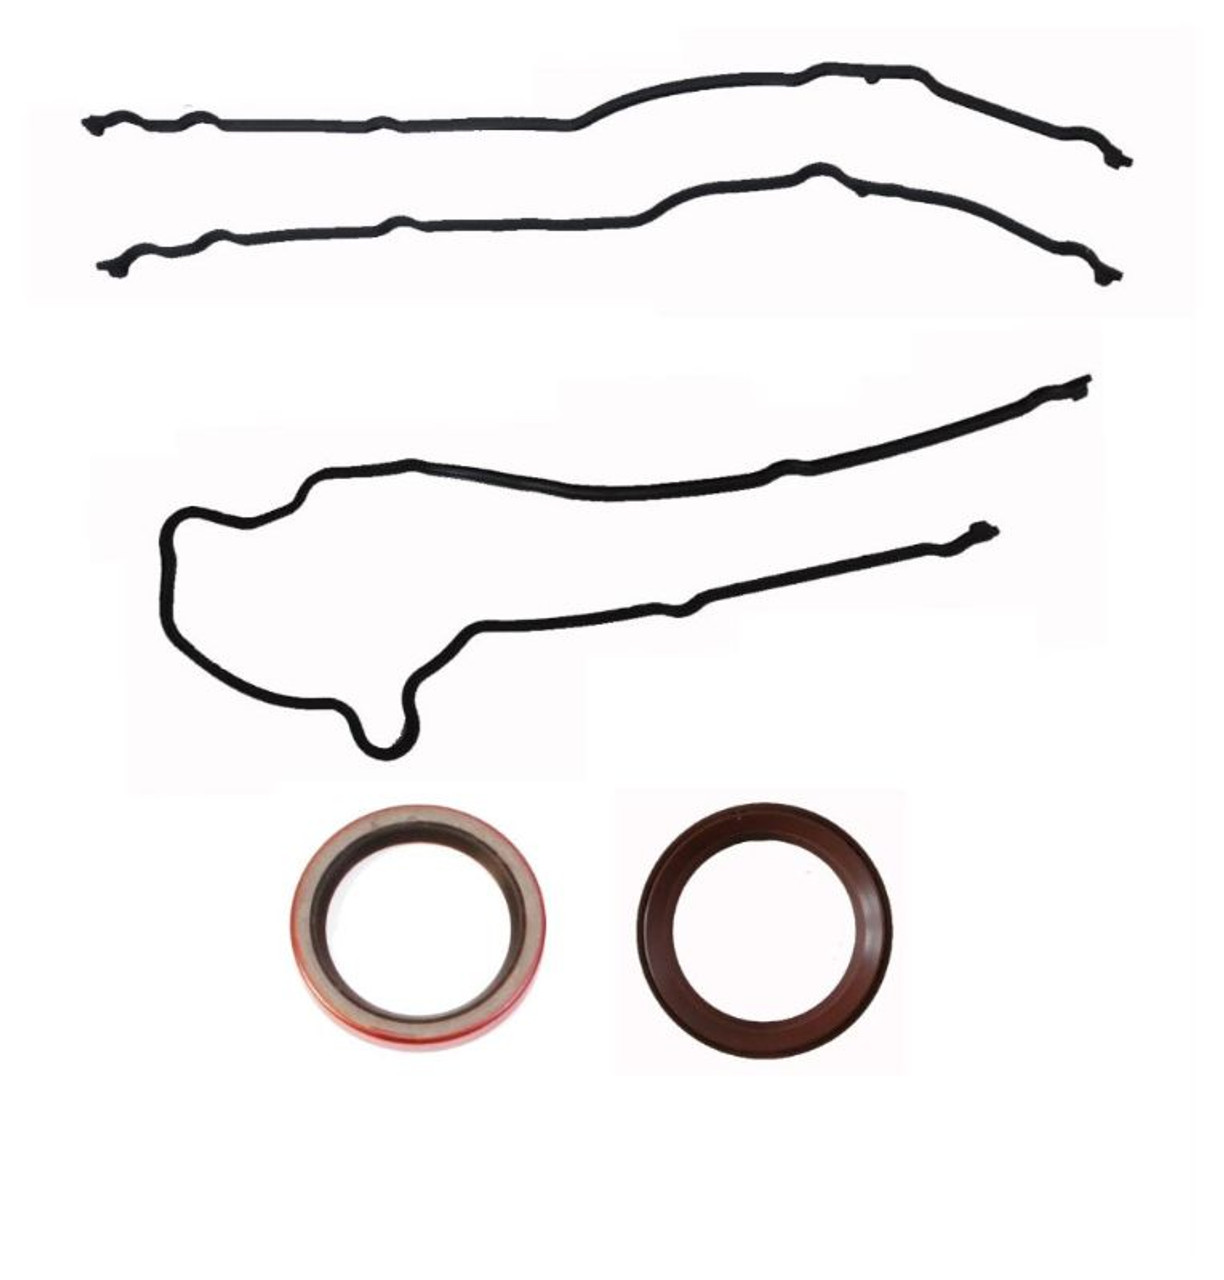 2005 Ford E-350 Super Duty 5.4L Engine Timing Cover Gasket Set TCF330-A -200